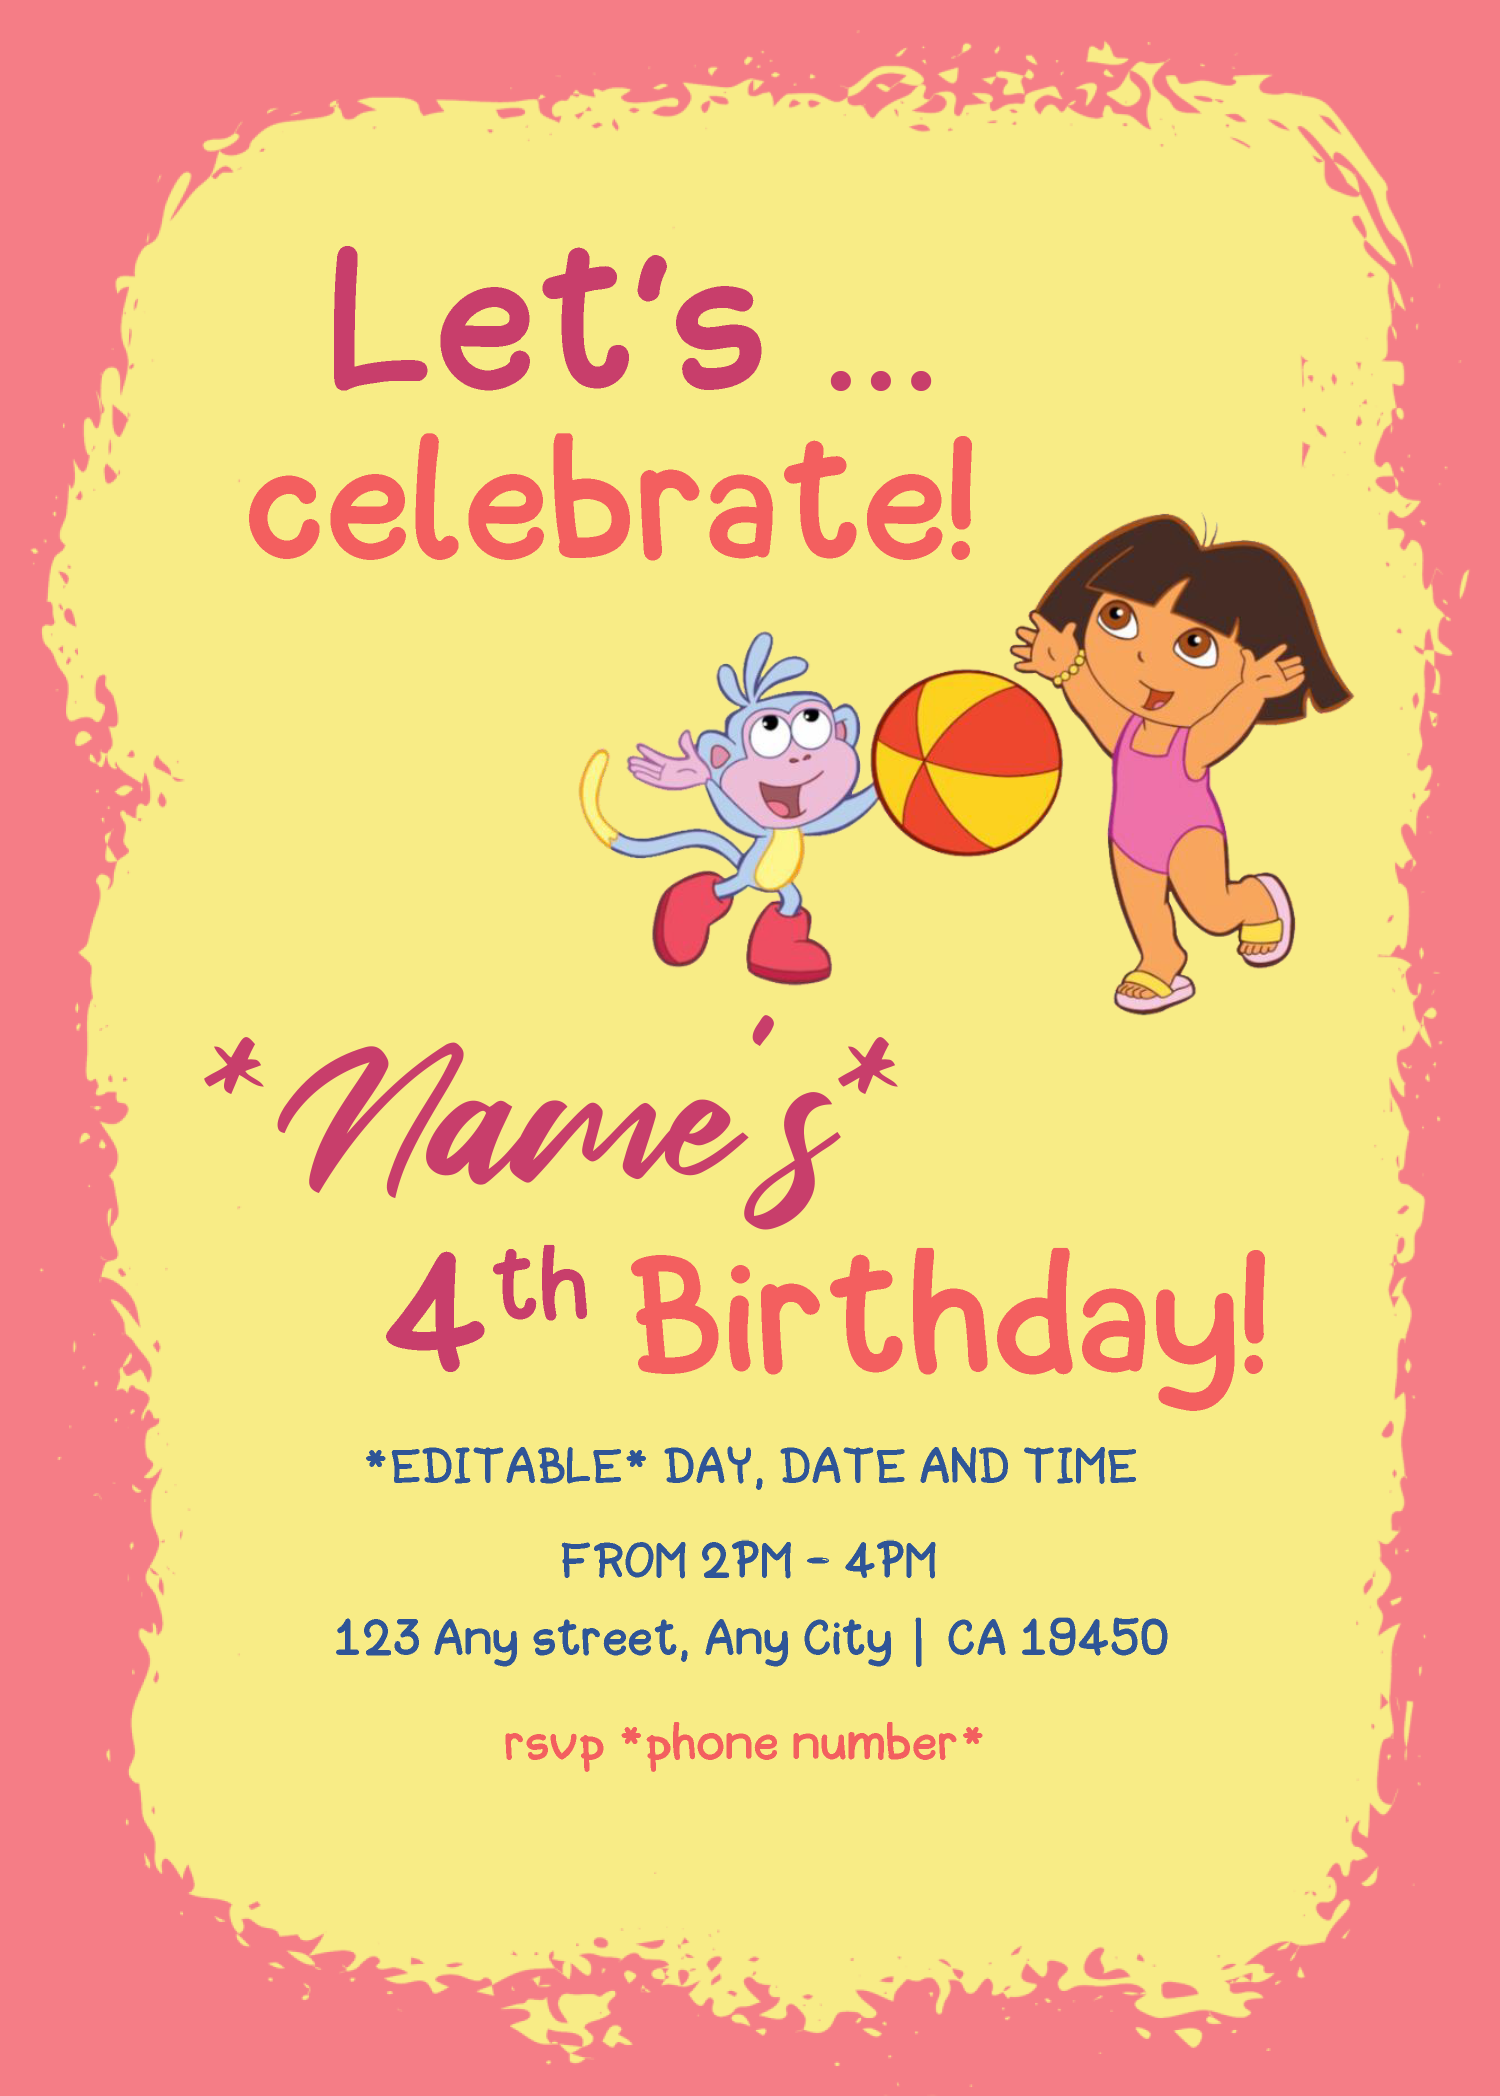 Dora The Explorer And Boots Personalized Birthday Banner With An Optional Free Printable Invitation Chalkboard Dora Dora The Explorer Party Supplies Party Decor Ninebot Ro